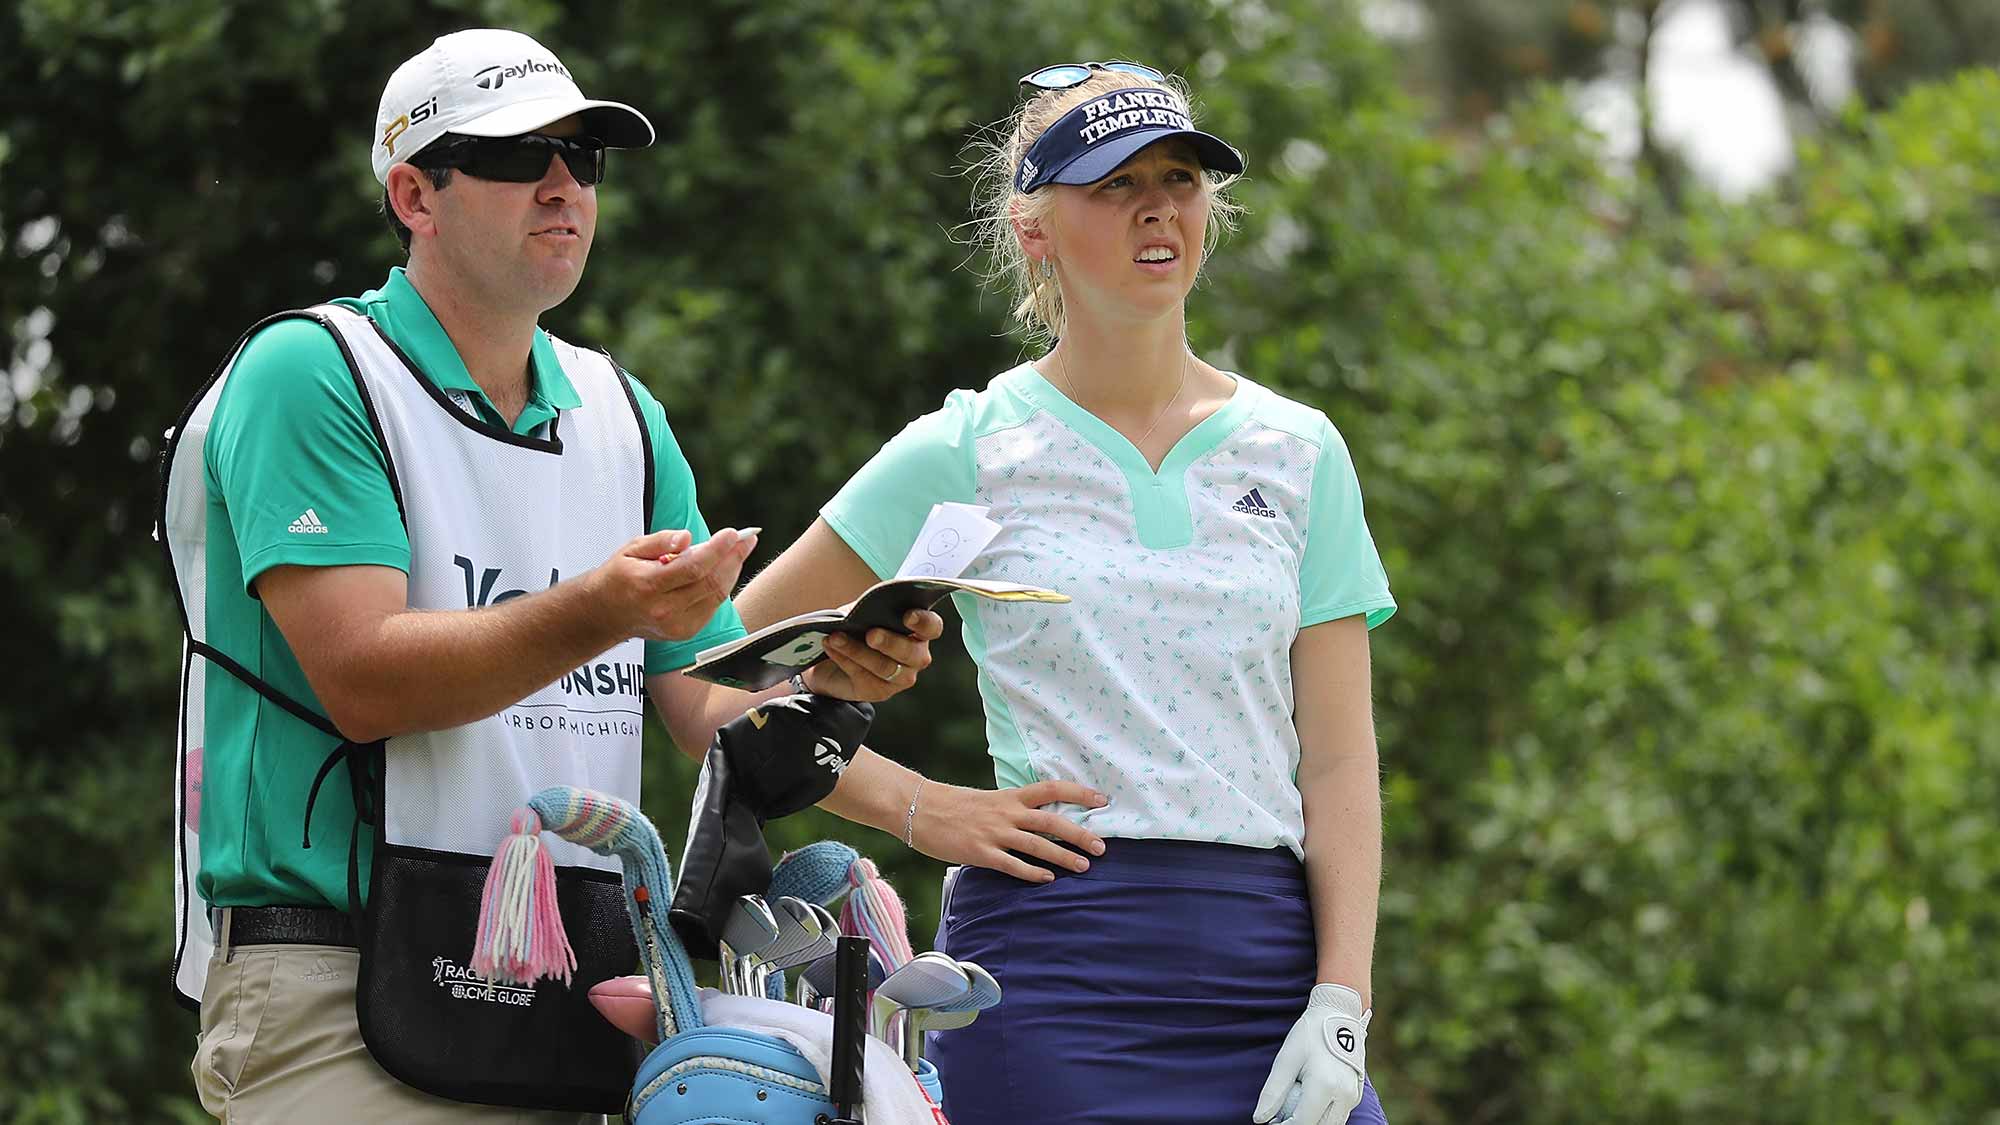 Jessica Korda from the United States talks with her caddie on the third hole during the third round of the LPGA Volvik Championship